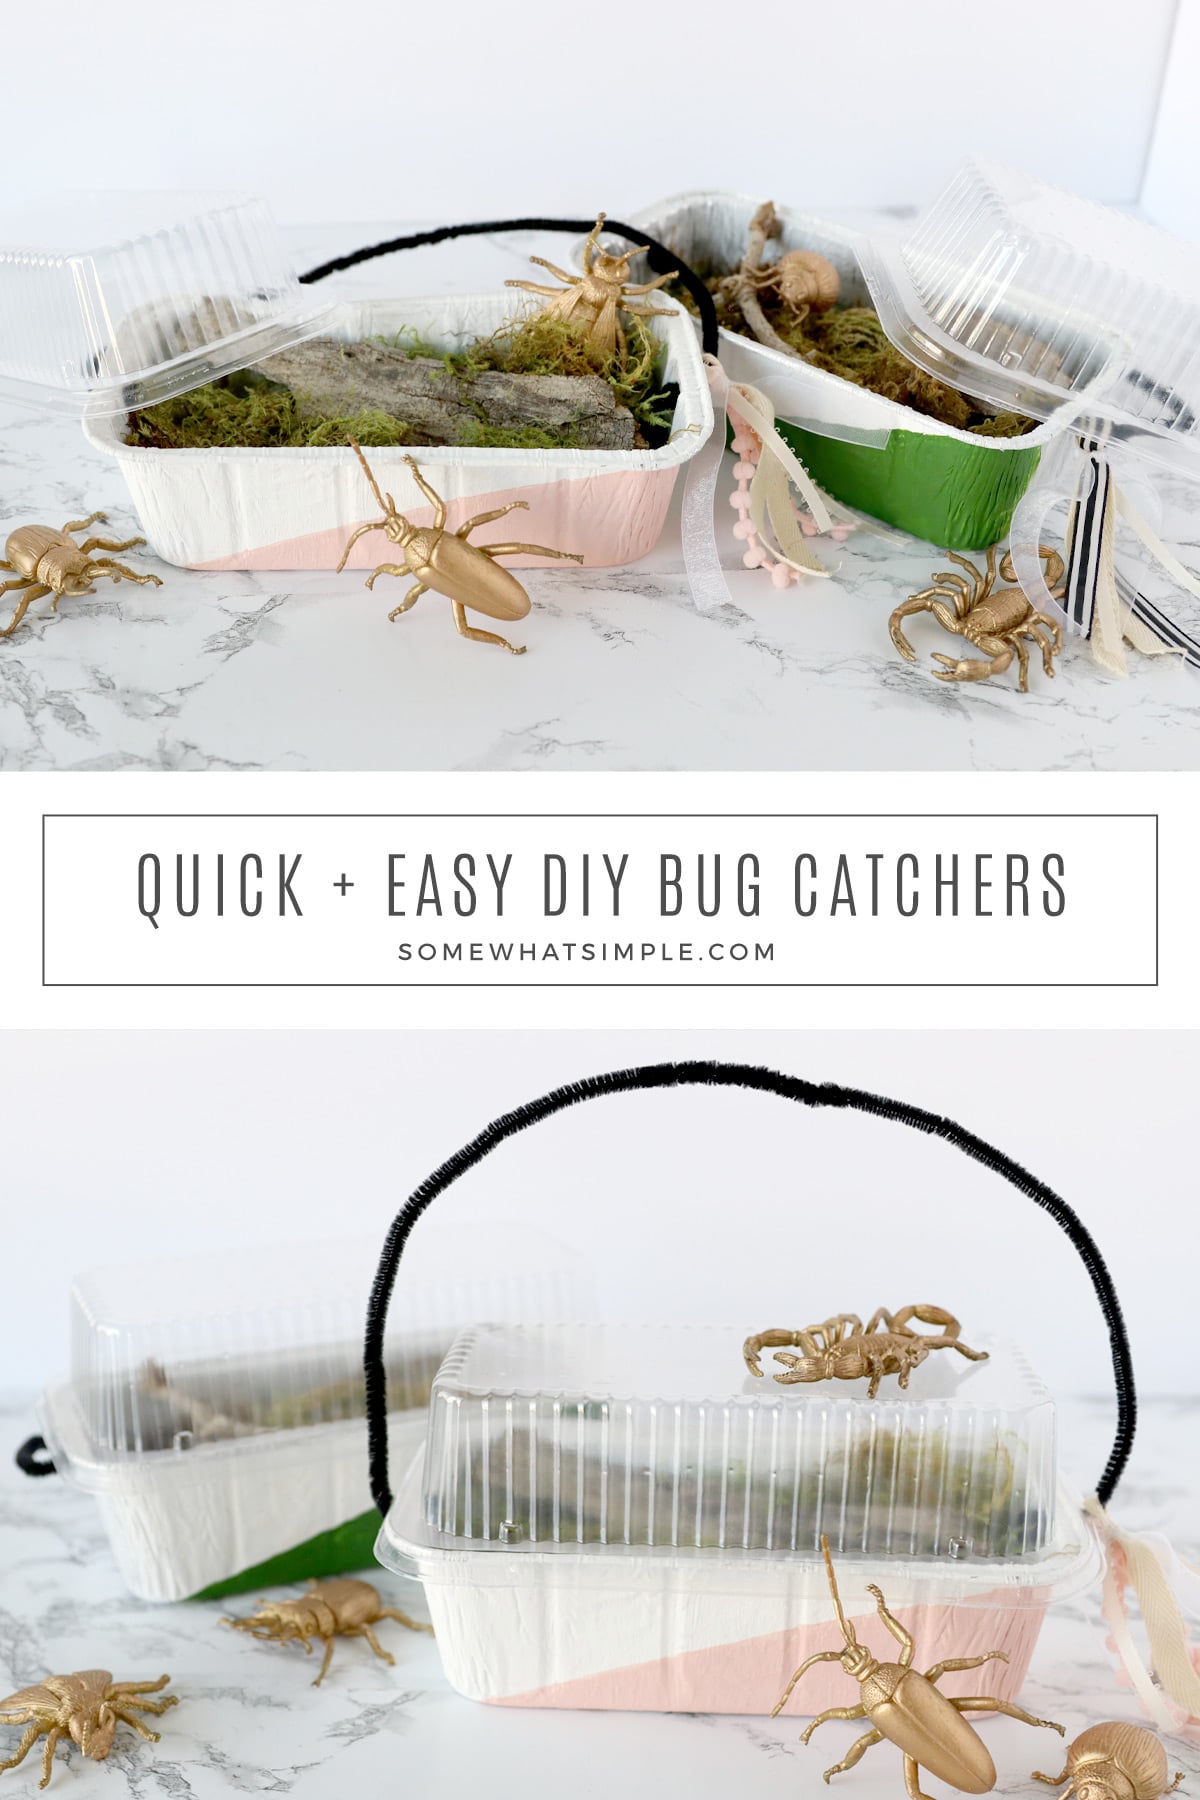 A fun way to explore the outdoors, and capture insects without harming them, here's how to make your own bug catchers from a disposable bread pan. via @somewhatsimple